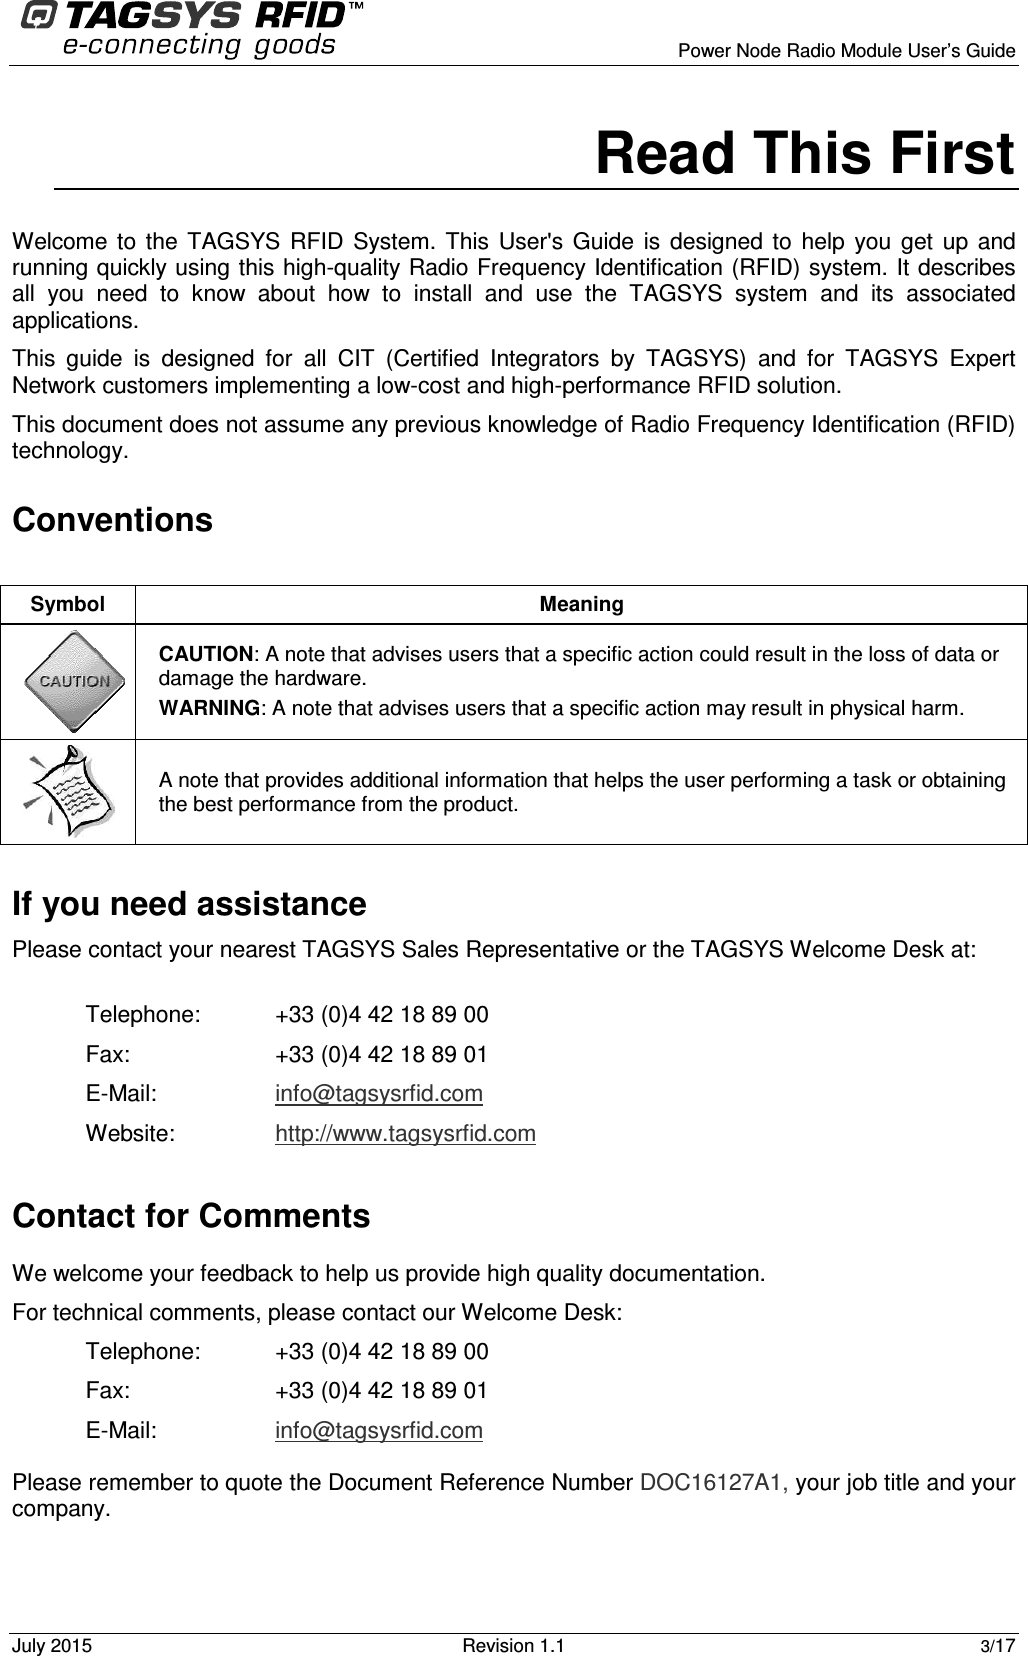      Power Node Radio Module User’s Guide July 2015  Revision 1.1 3/17   Read This First Welcome  to  the  TAGSYS  RFID  System. This  User&apos;s  Guide  is  designed  to  help  you  get  up  and running quickly using this high-quality Radio Frequency Identification (RFID) system. It describes all  you  need  to  know  about  how  to  install  and  use  the  TAGSYS  system  and  its  associated applications. This  guide  is  designed  for  all  CIT  (Certified  Integrators  by  TAGSYS)  and  for  TAGSYS  Expert Network customers implementing a low-cost and high-performance RFID solution. This document does not assume any previous knowledge of Radio Frequency Identification (RFID) technology.  Conventions  If you need assistance Please contact your nearest TAGSYS Sales Representative or the TAGSYS Welcome Desk at:  Telephone:  +33 (0)4 42 18 89 00 Fax:  +33 (0)4 42 18 89 01 E-Mail:  info@tagsysrfid.com Website:  http://www.tagsysrfid.com Contact for Comments We welcome your feedback to help us provide high quality documentation.  For technical comments, please contact our Welcome Desk: Telephone:  +33 (0)4 42 18 89 00  Fax:  +33 (0)4 42 18 89 01 E-Mail:  info@tagsysrfid.com Please remember to quote the Document Reference Number DOC16127A1, your job title and your company. Symbol  Meaning  CAUTION: A note that advises users that a specific action could result in the loss of data or damage the hardware. WARNING: A note that advises users that a specific action may result in physical harm.   A note that provides additional information that helps the user performing a task or obtaining the best performance from the product. 